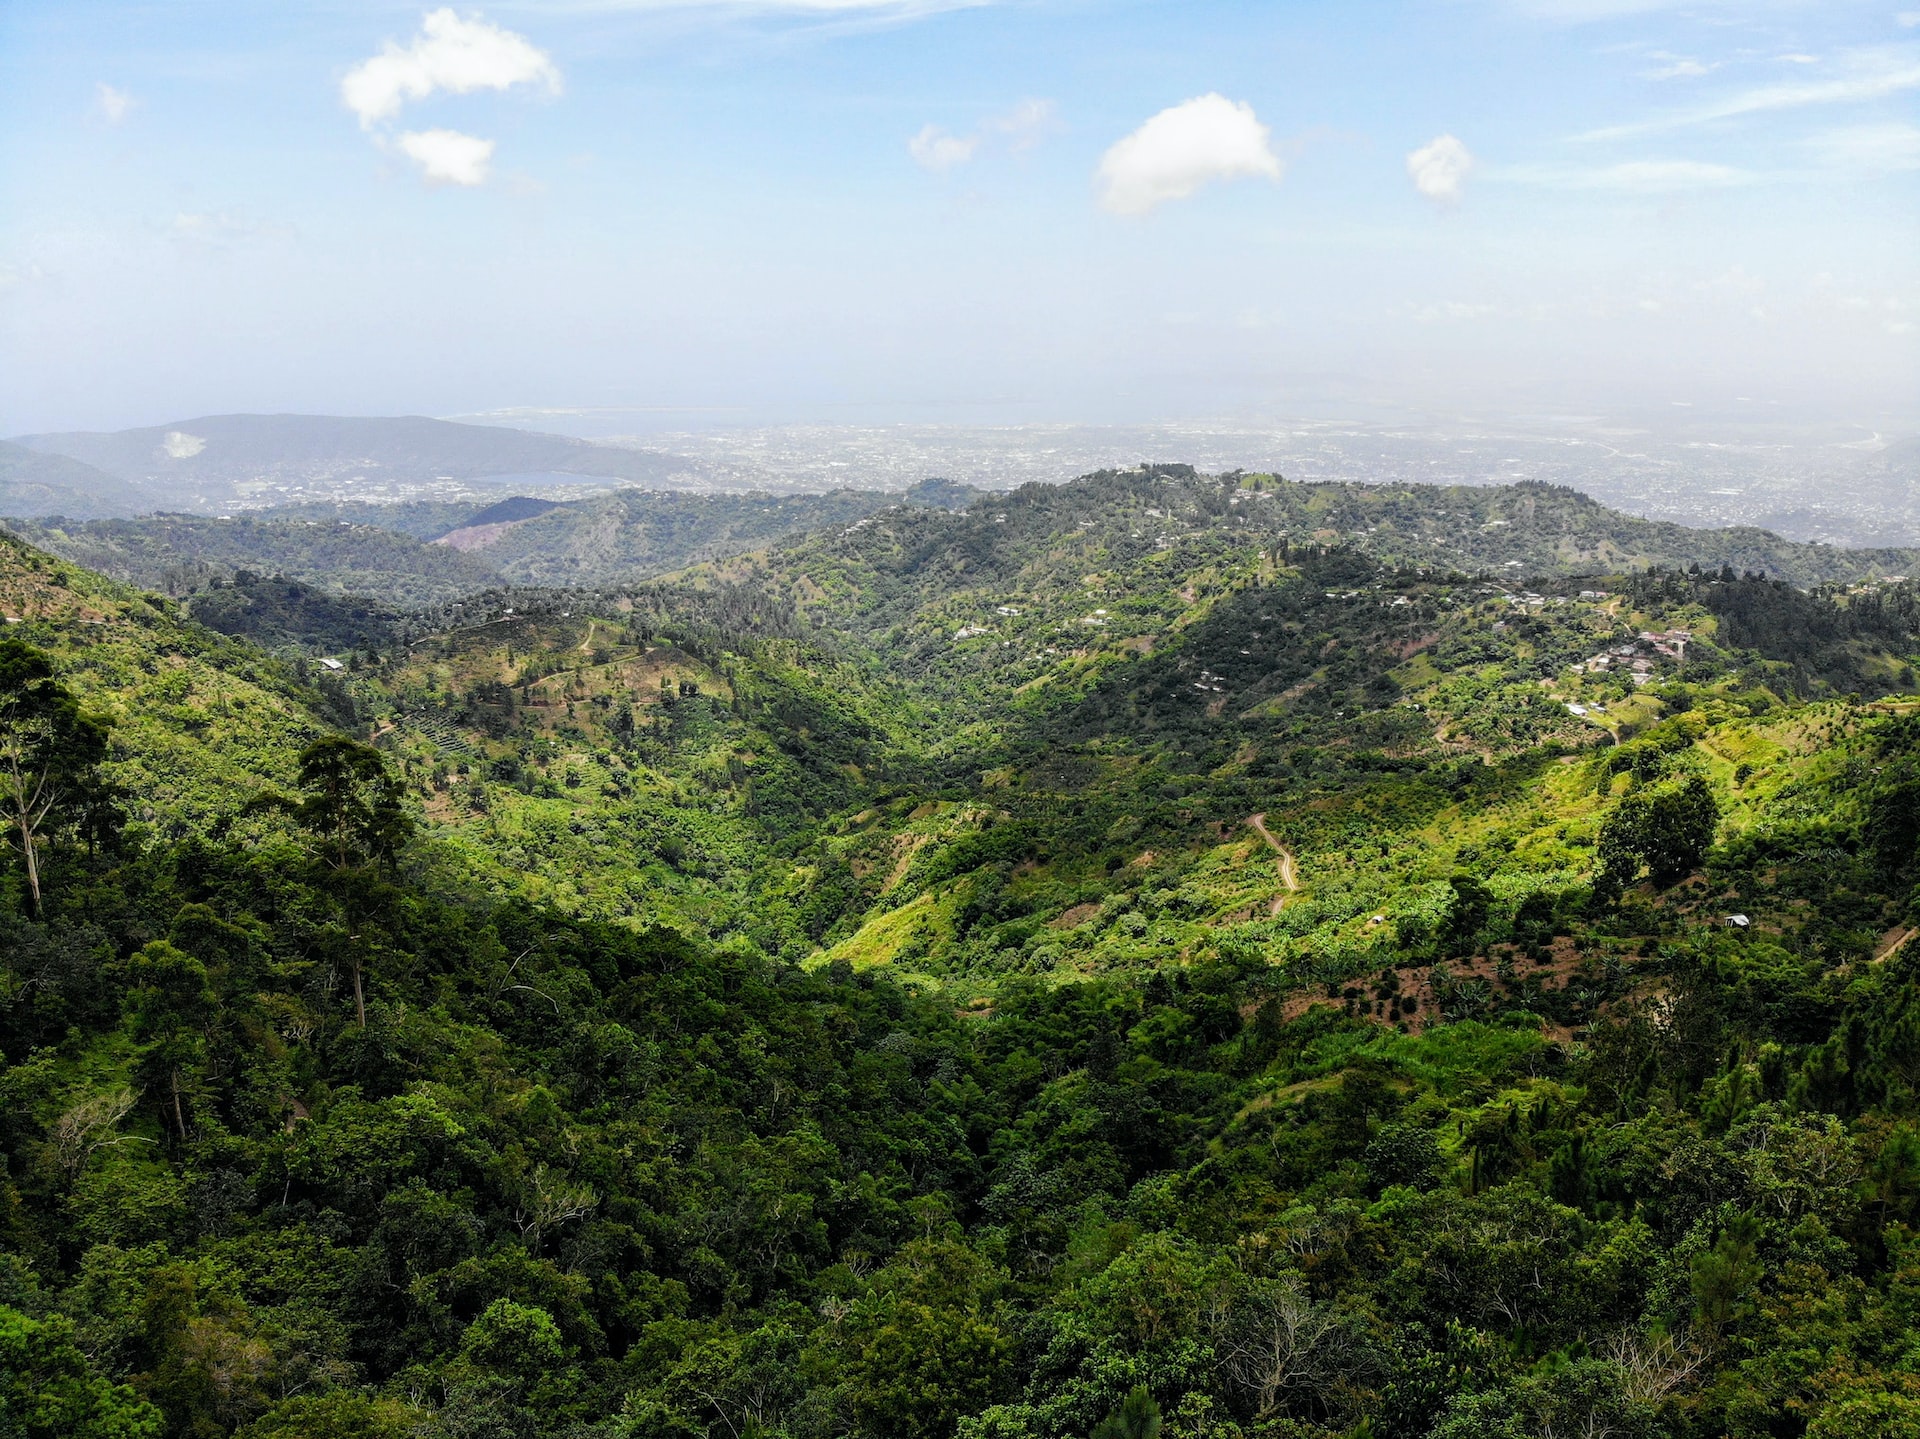 The greenery is evident in Blue Mountain, Jamaica.